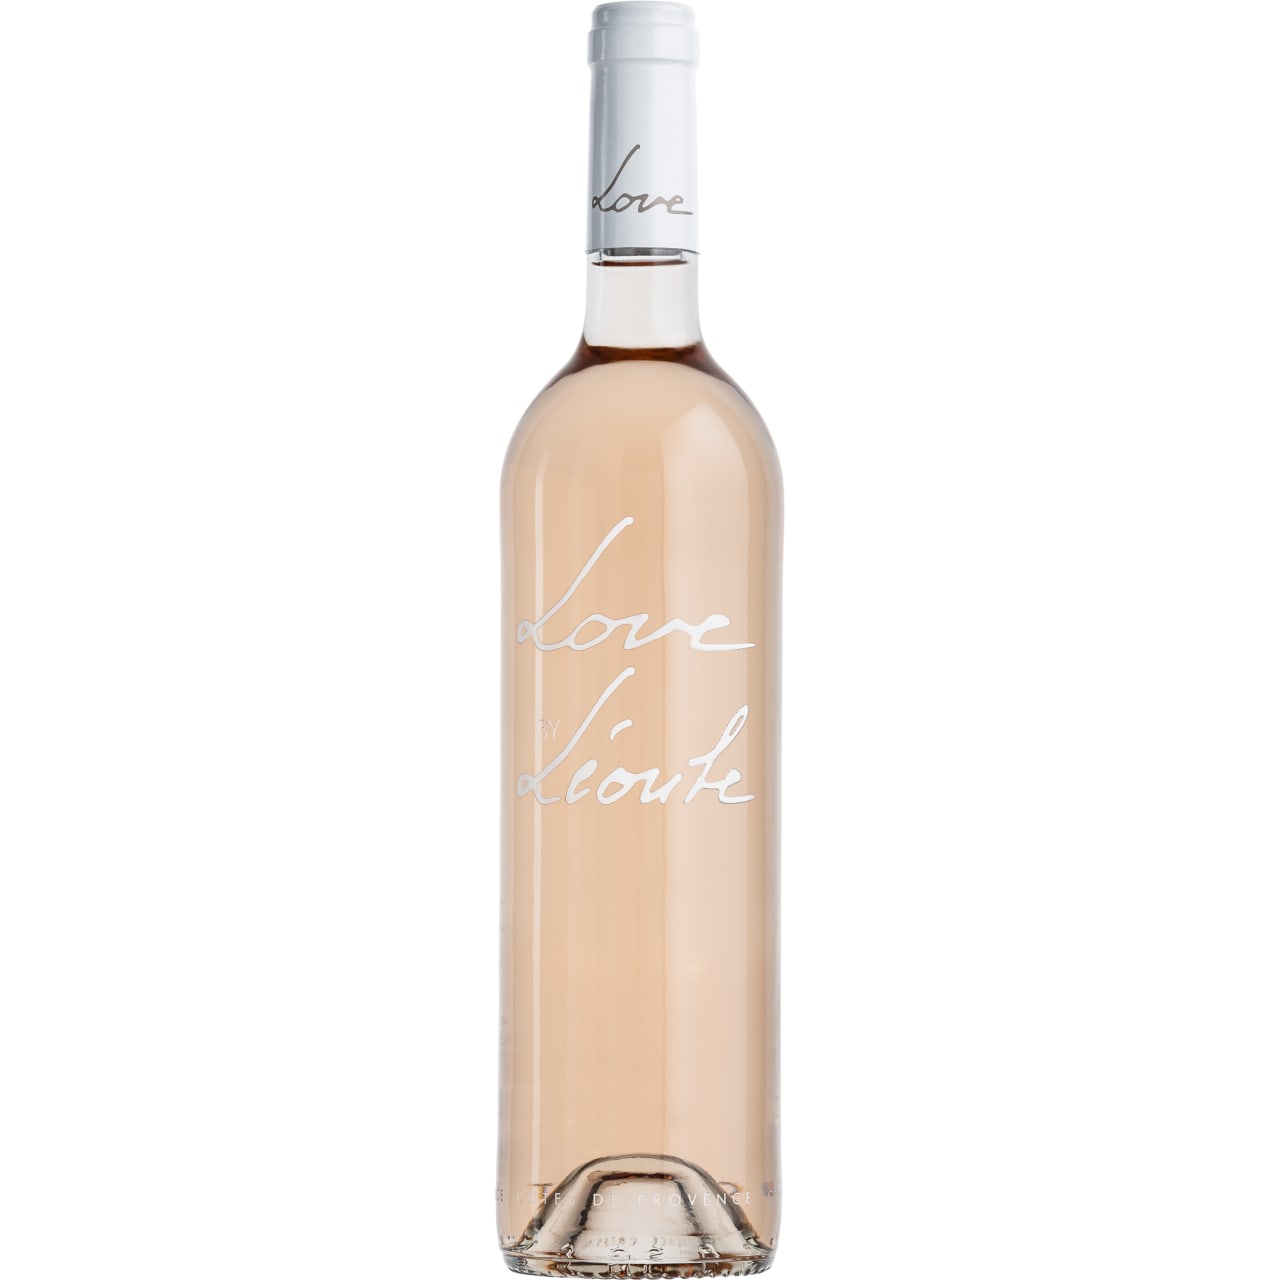 The quintessential, dry and elegant Provence rosé: attractive red berries, wild flowers, melon and acacia. With vibrant acidity and a lovely finish, this is a wine to come back to again and again.